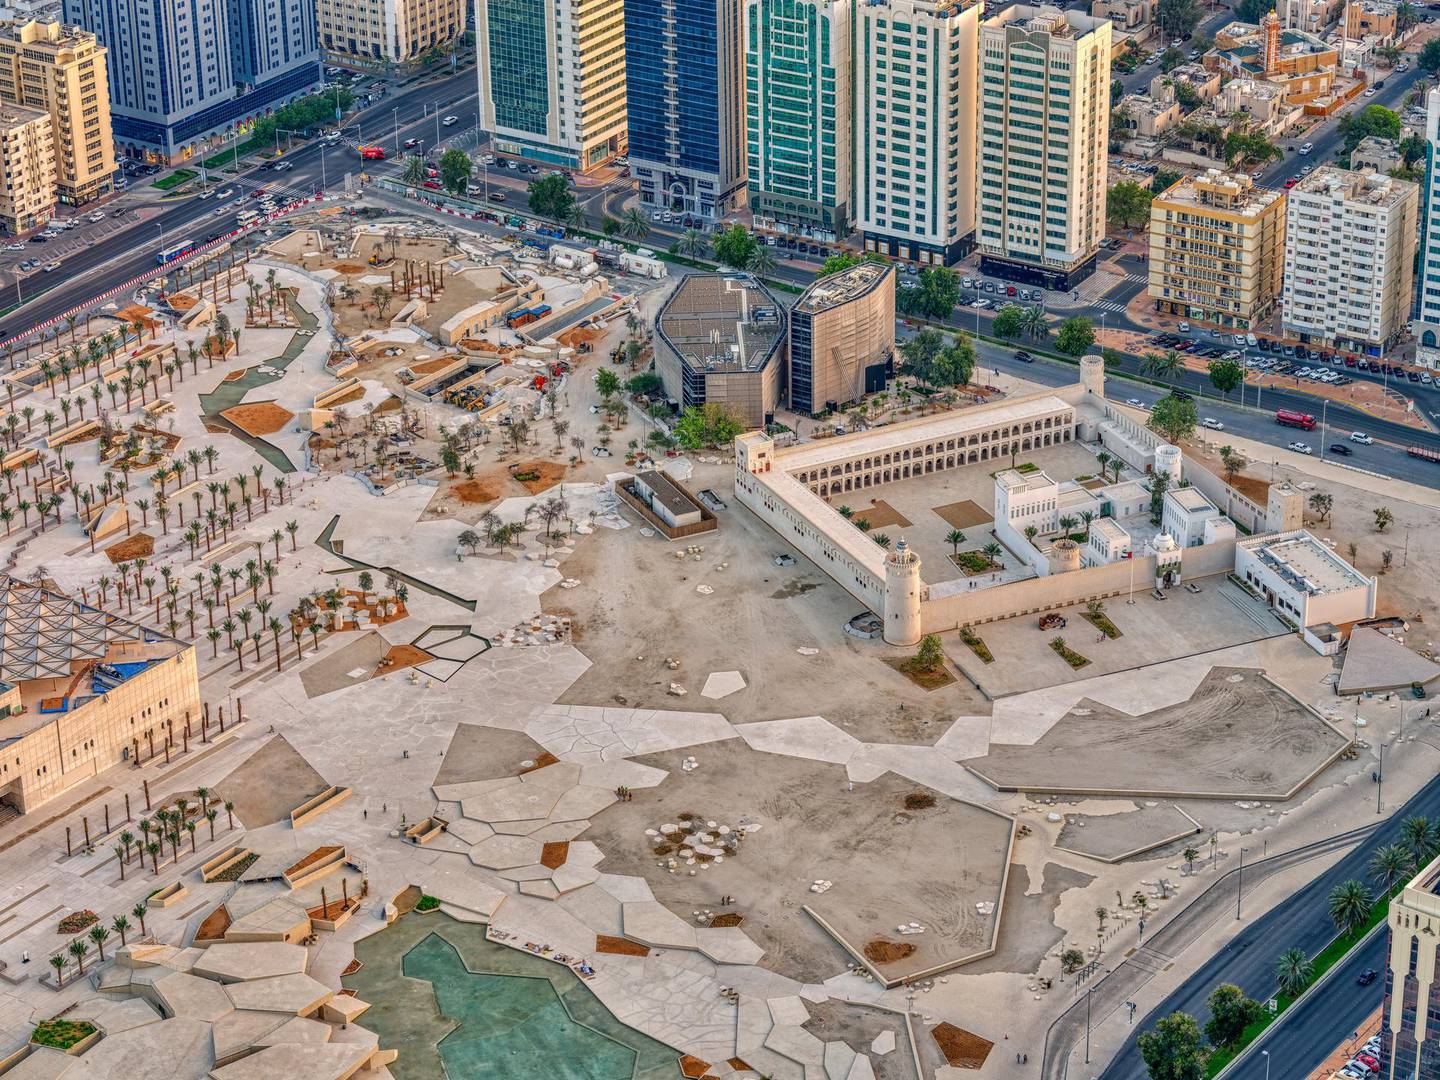 The historic Al Hosn area, which comprises Qasr Al Hosn, Cultural Foundation and House of Artisans, is the site of a new series of family-friendly events on alternating weekends until April 2020. Courtesy Al Hosn